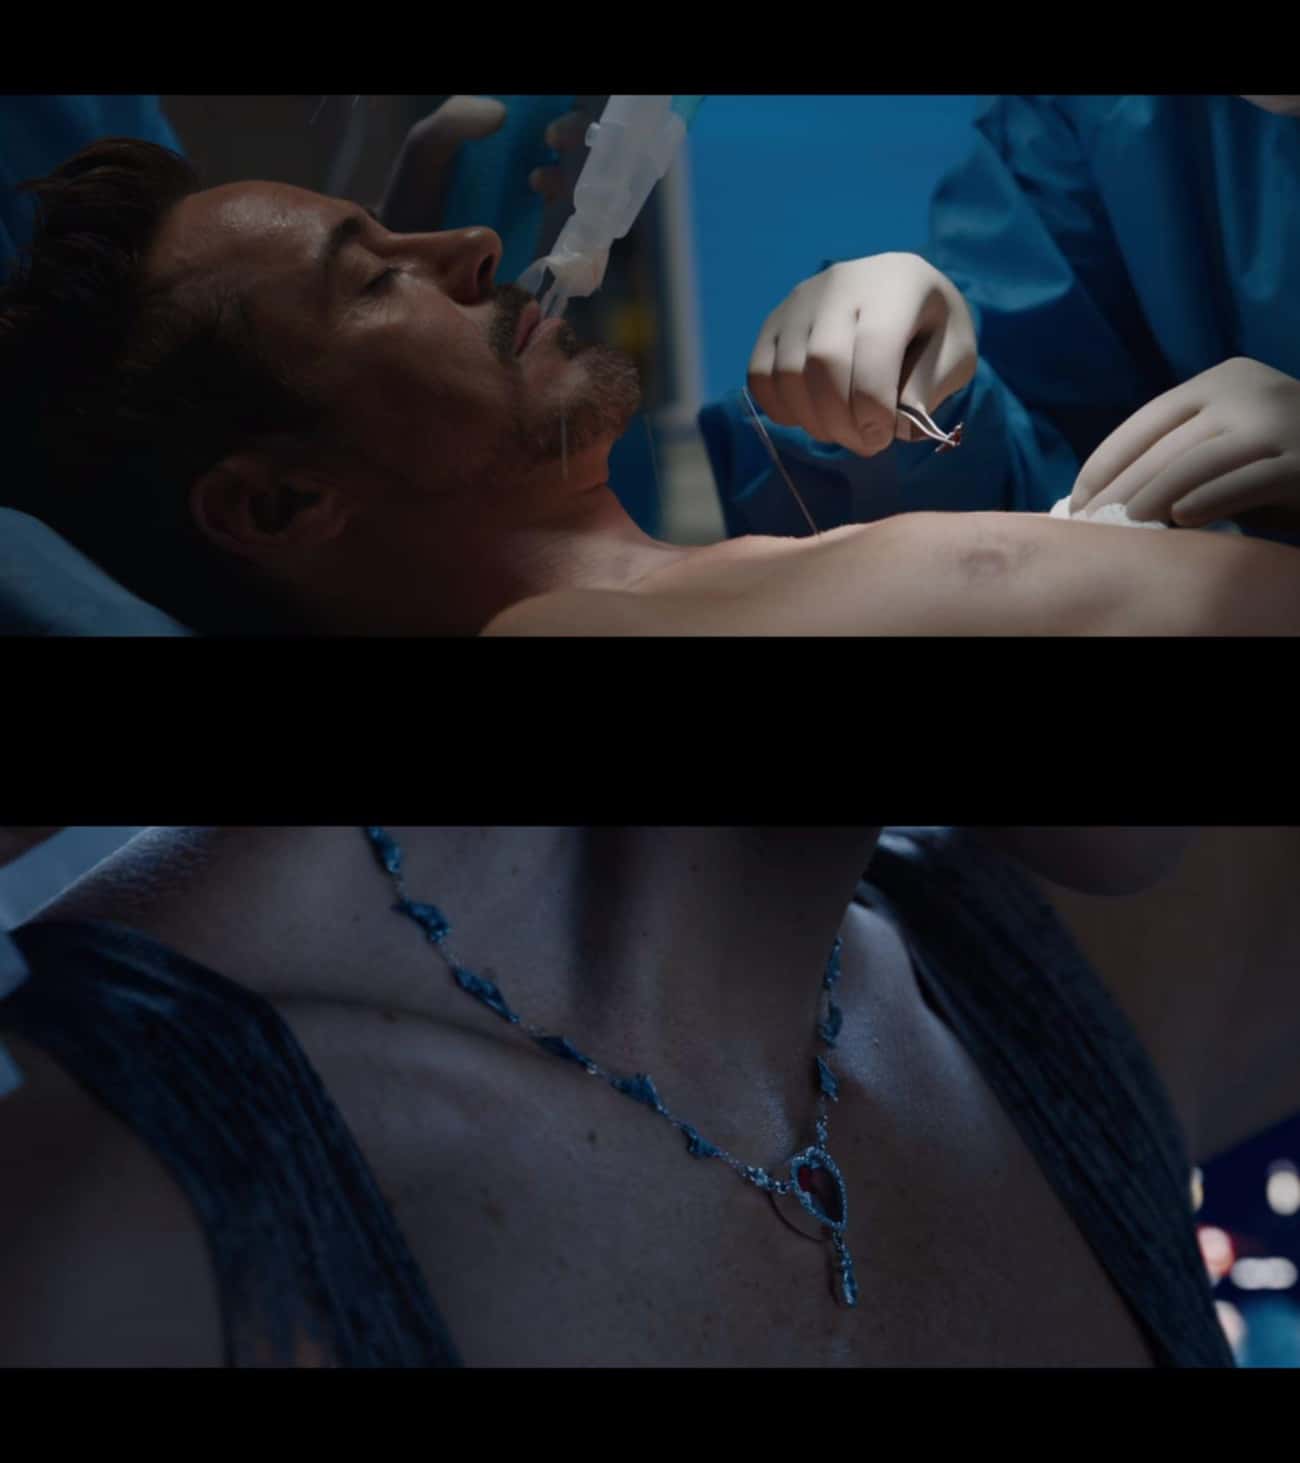 Tony Gave Pepper A Necklace Made From The Shrapnel In His Chest 